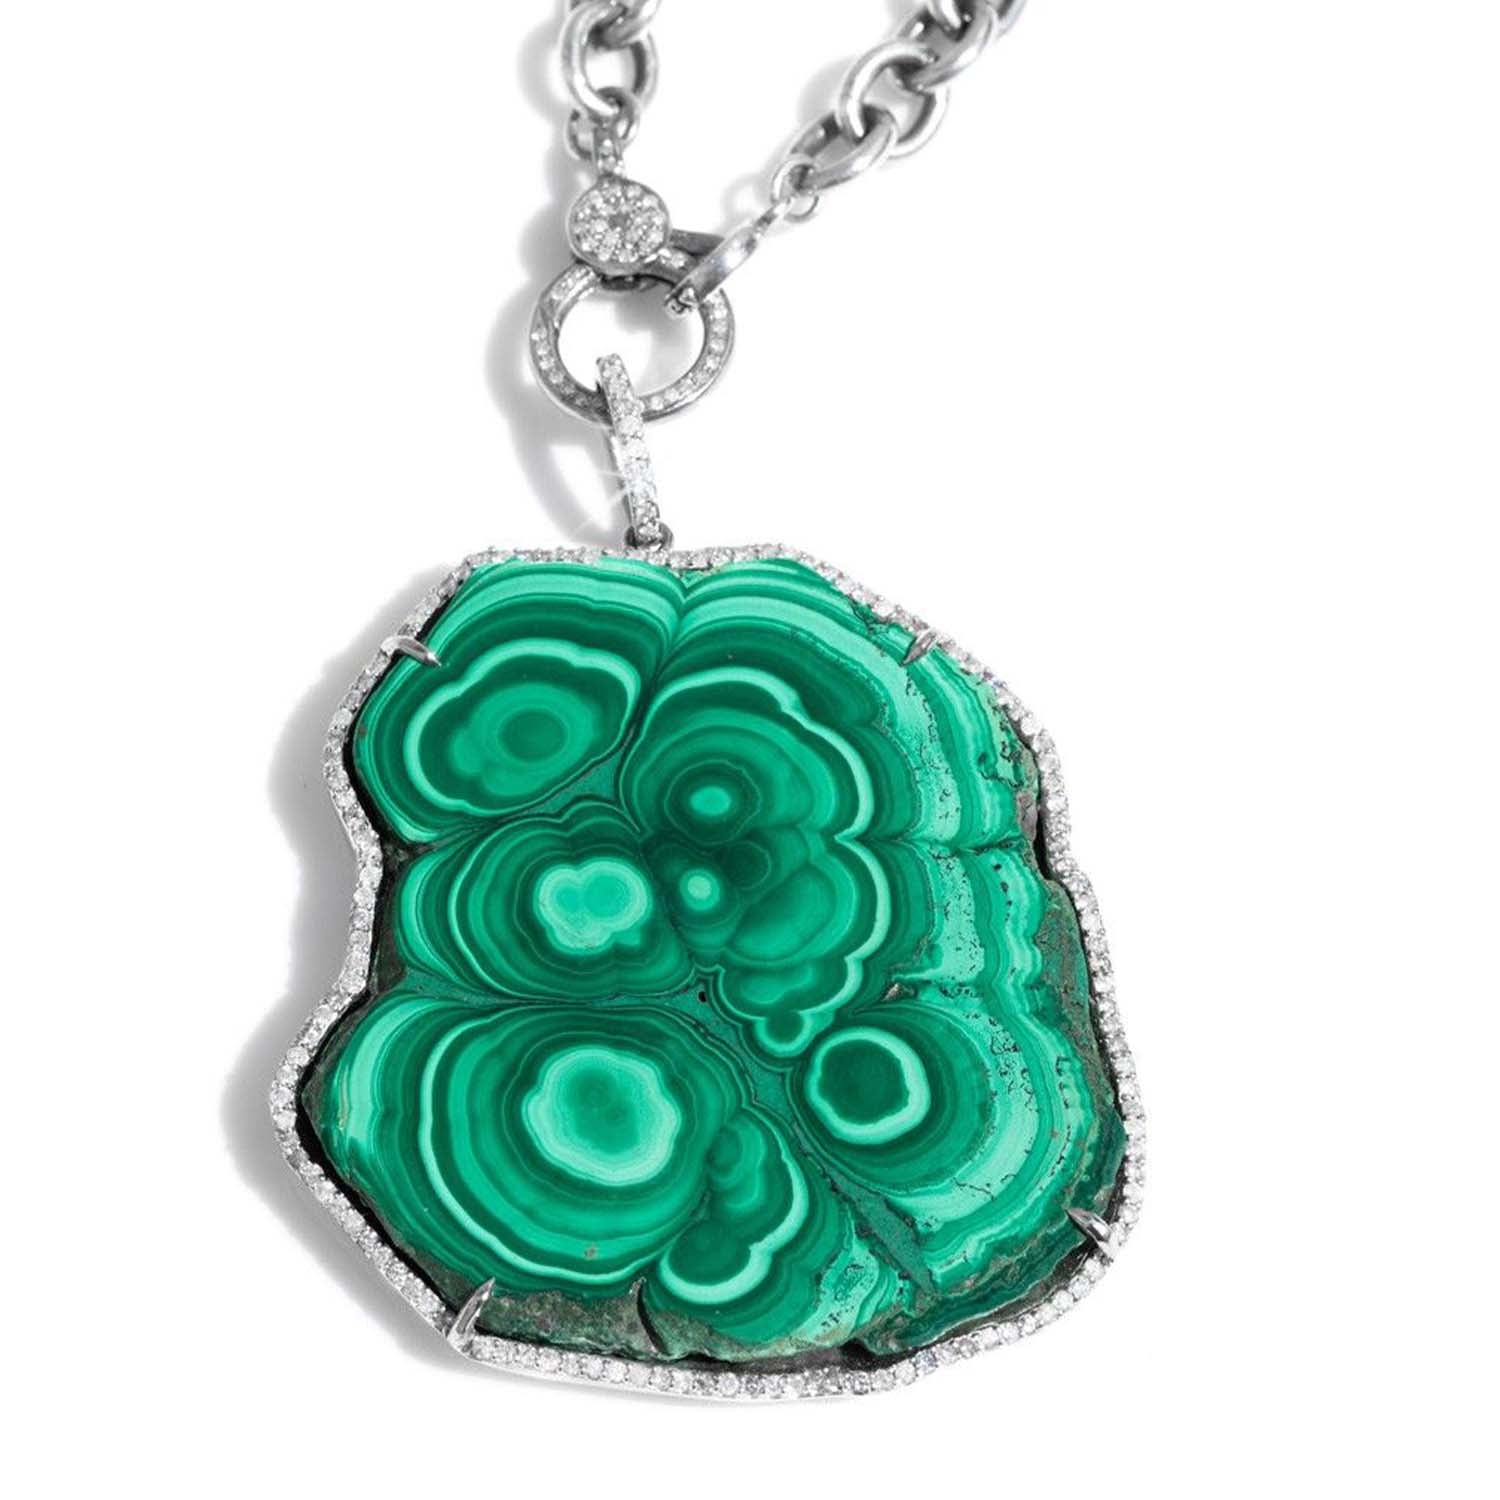 Large Malachite Slice Pendant with Diamond Halo on Chain Necklace "One of a Kind"